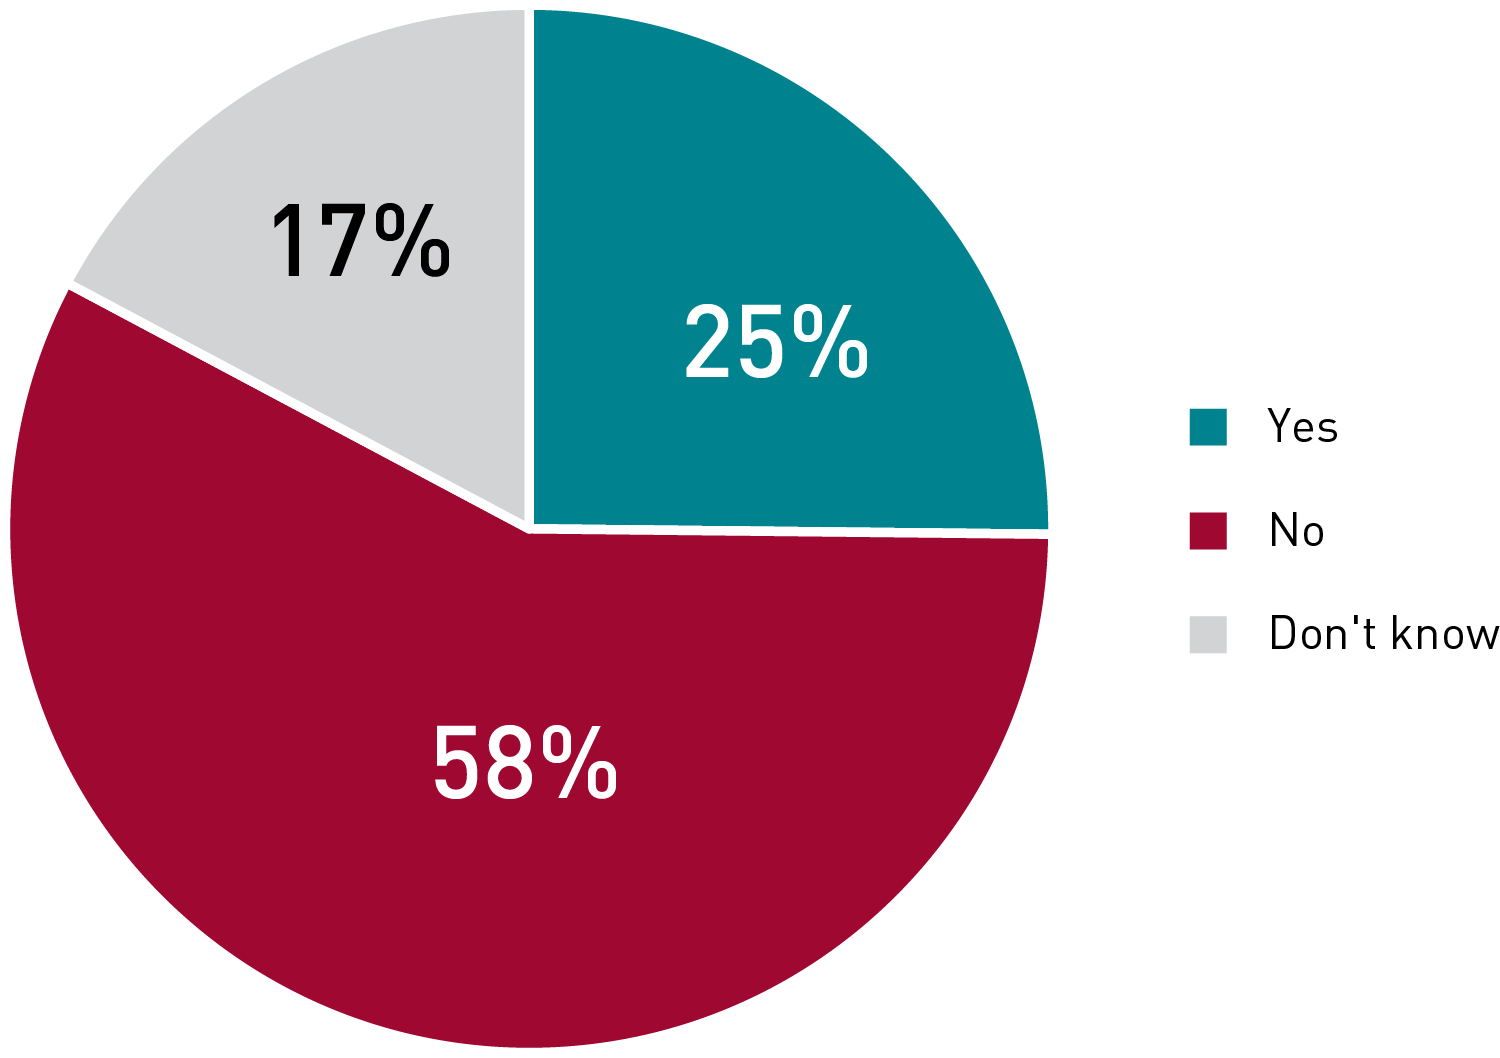 Pie chart showing survey respondents’ answers about whether the current structure for data functions is ideal for meeting the data and analytics needs of the institution. 58% said no, 25% said yes, and 17% said don’t know.